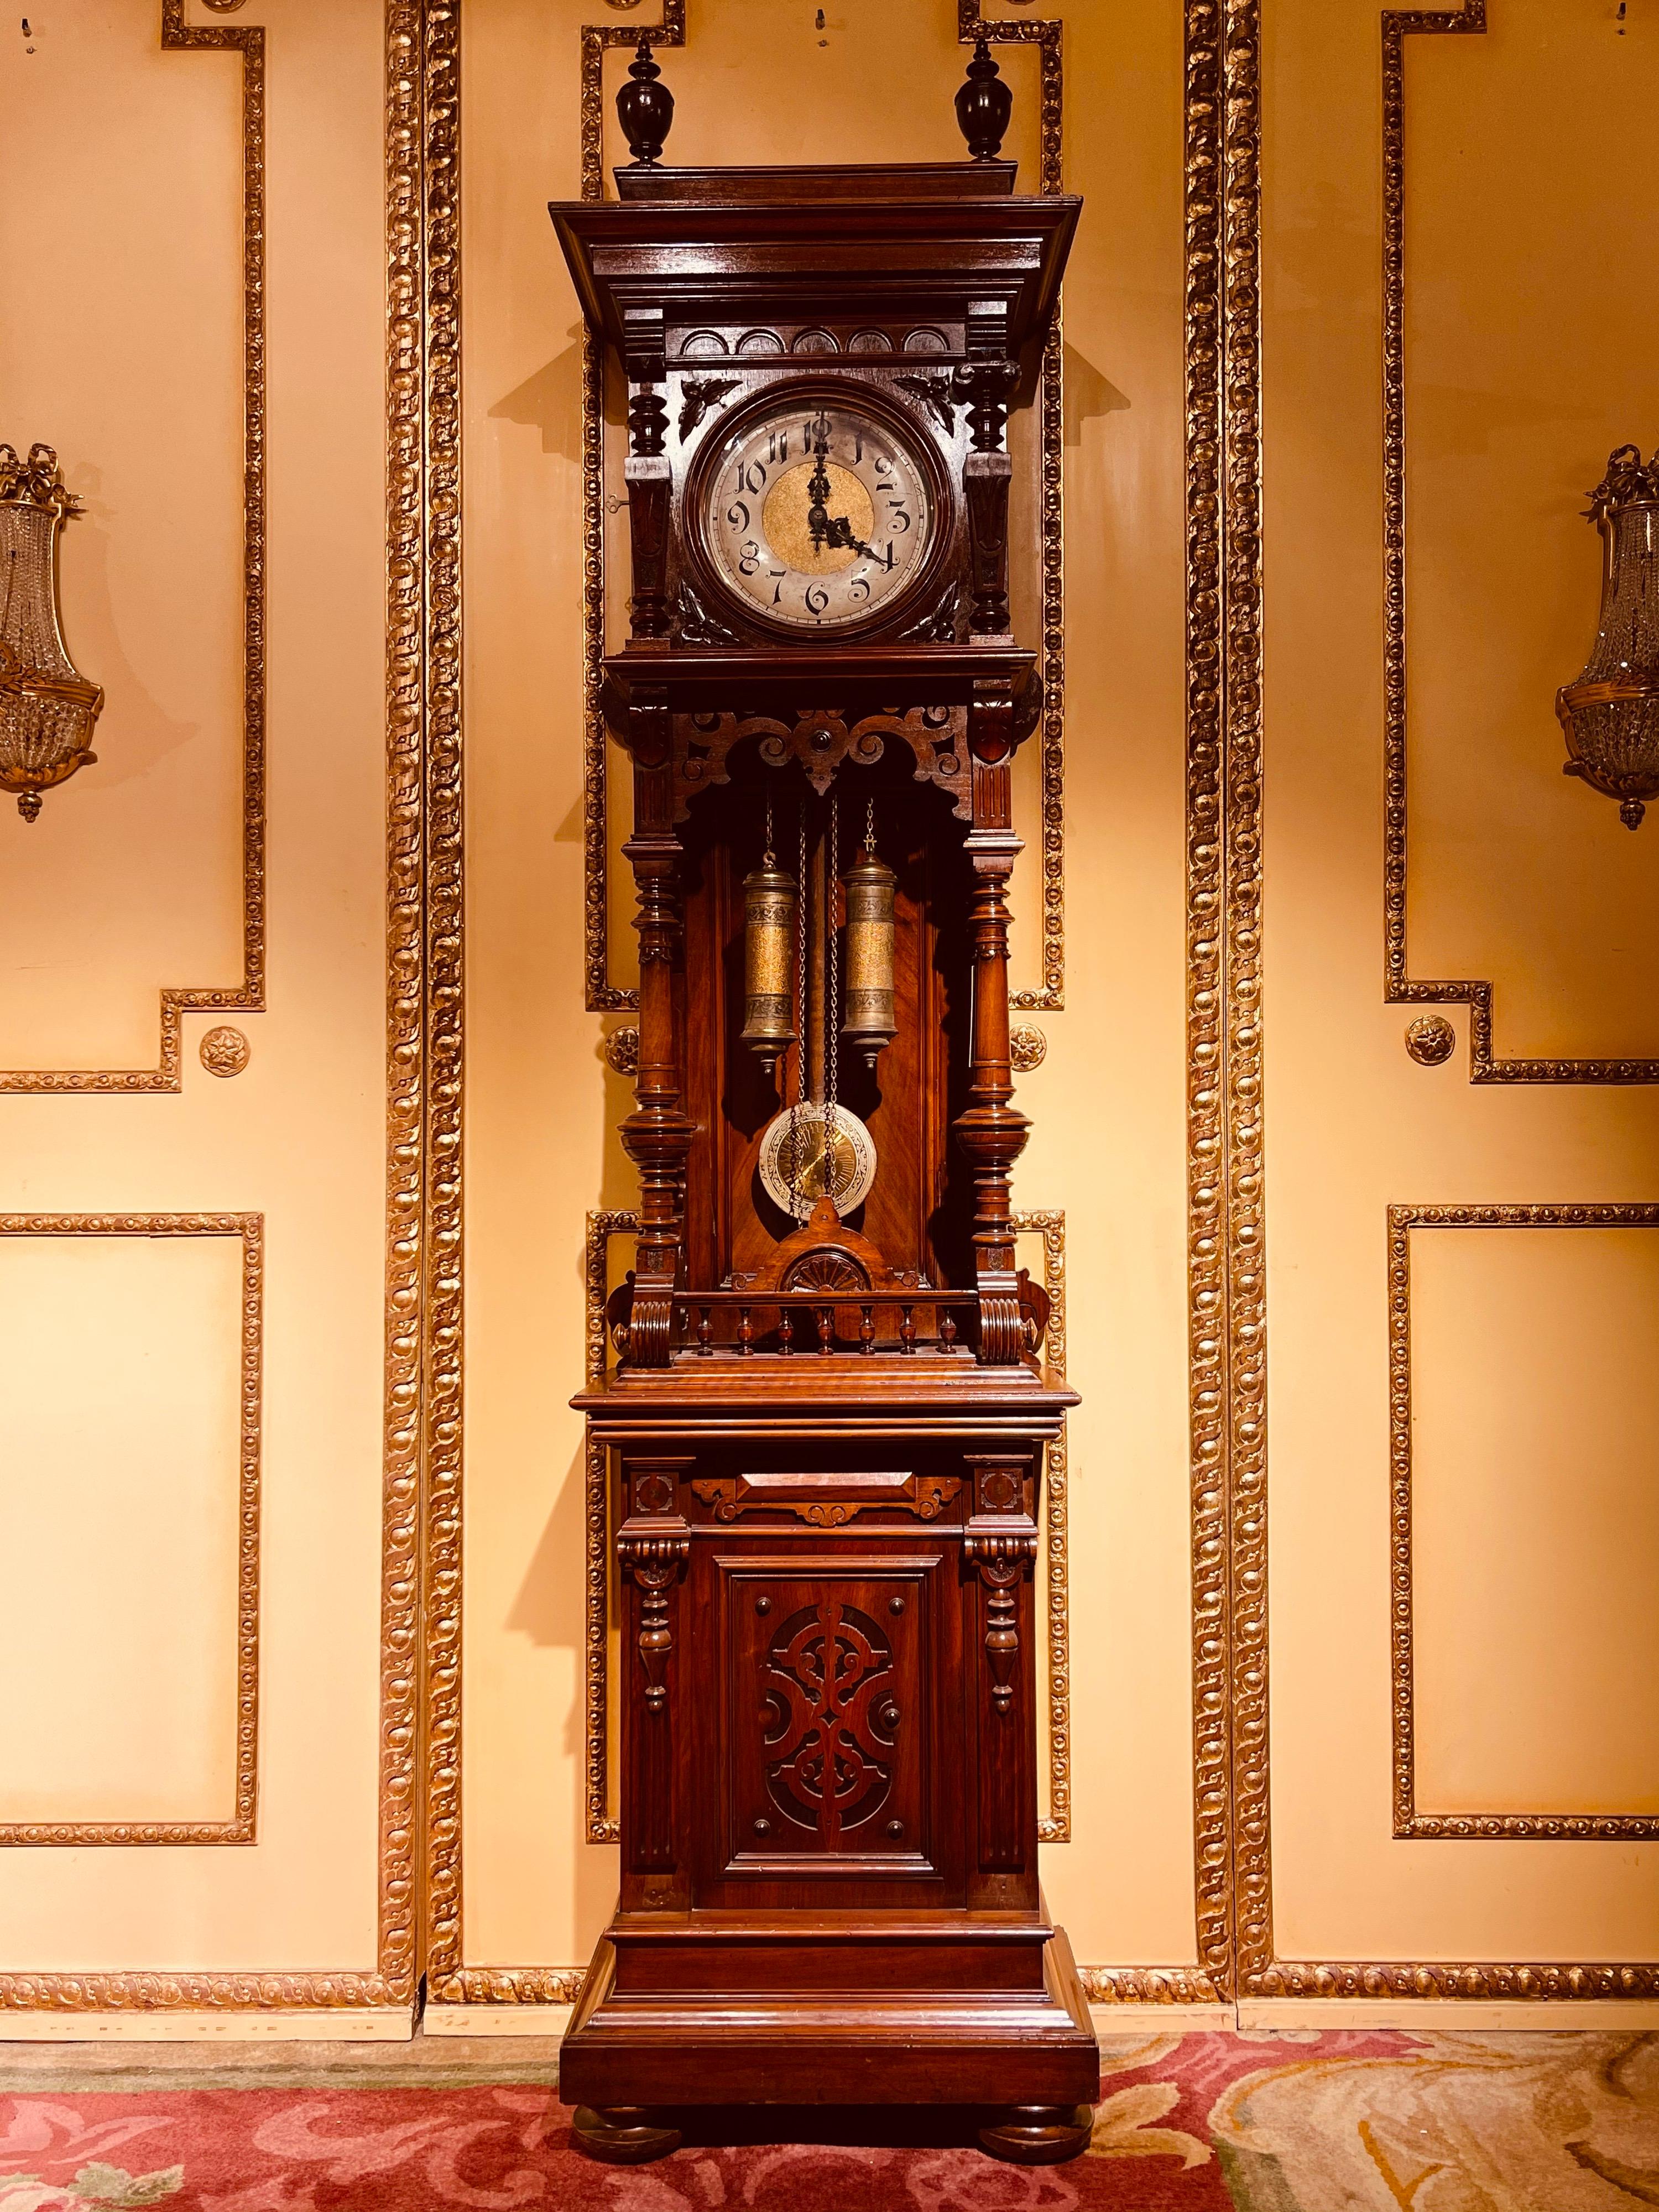 Unique antique Wilhelminian style grandfather clock, walnut, 19th century.

German grandfather clock from the 19th second hand and hour strike on bell with two weights and pendulum. Fully functional. Extremely finely carved walnut body with many